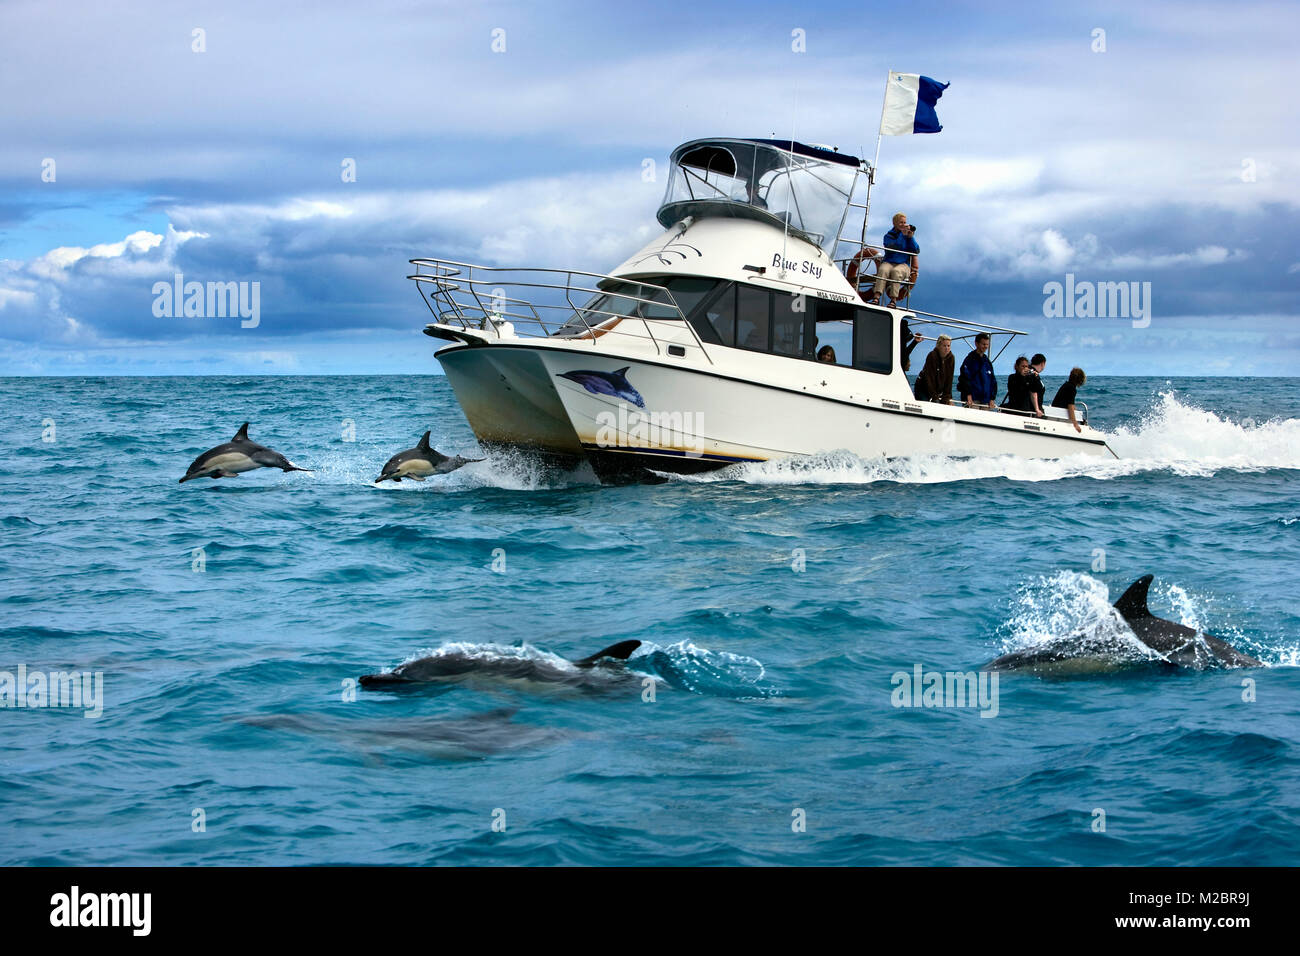 New Zealand, North Island, Whakatane, watching at and swimming with dolphins. Stock Photo